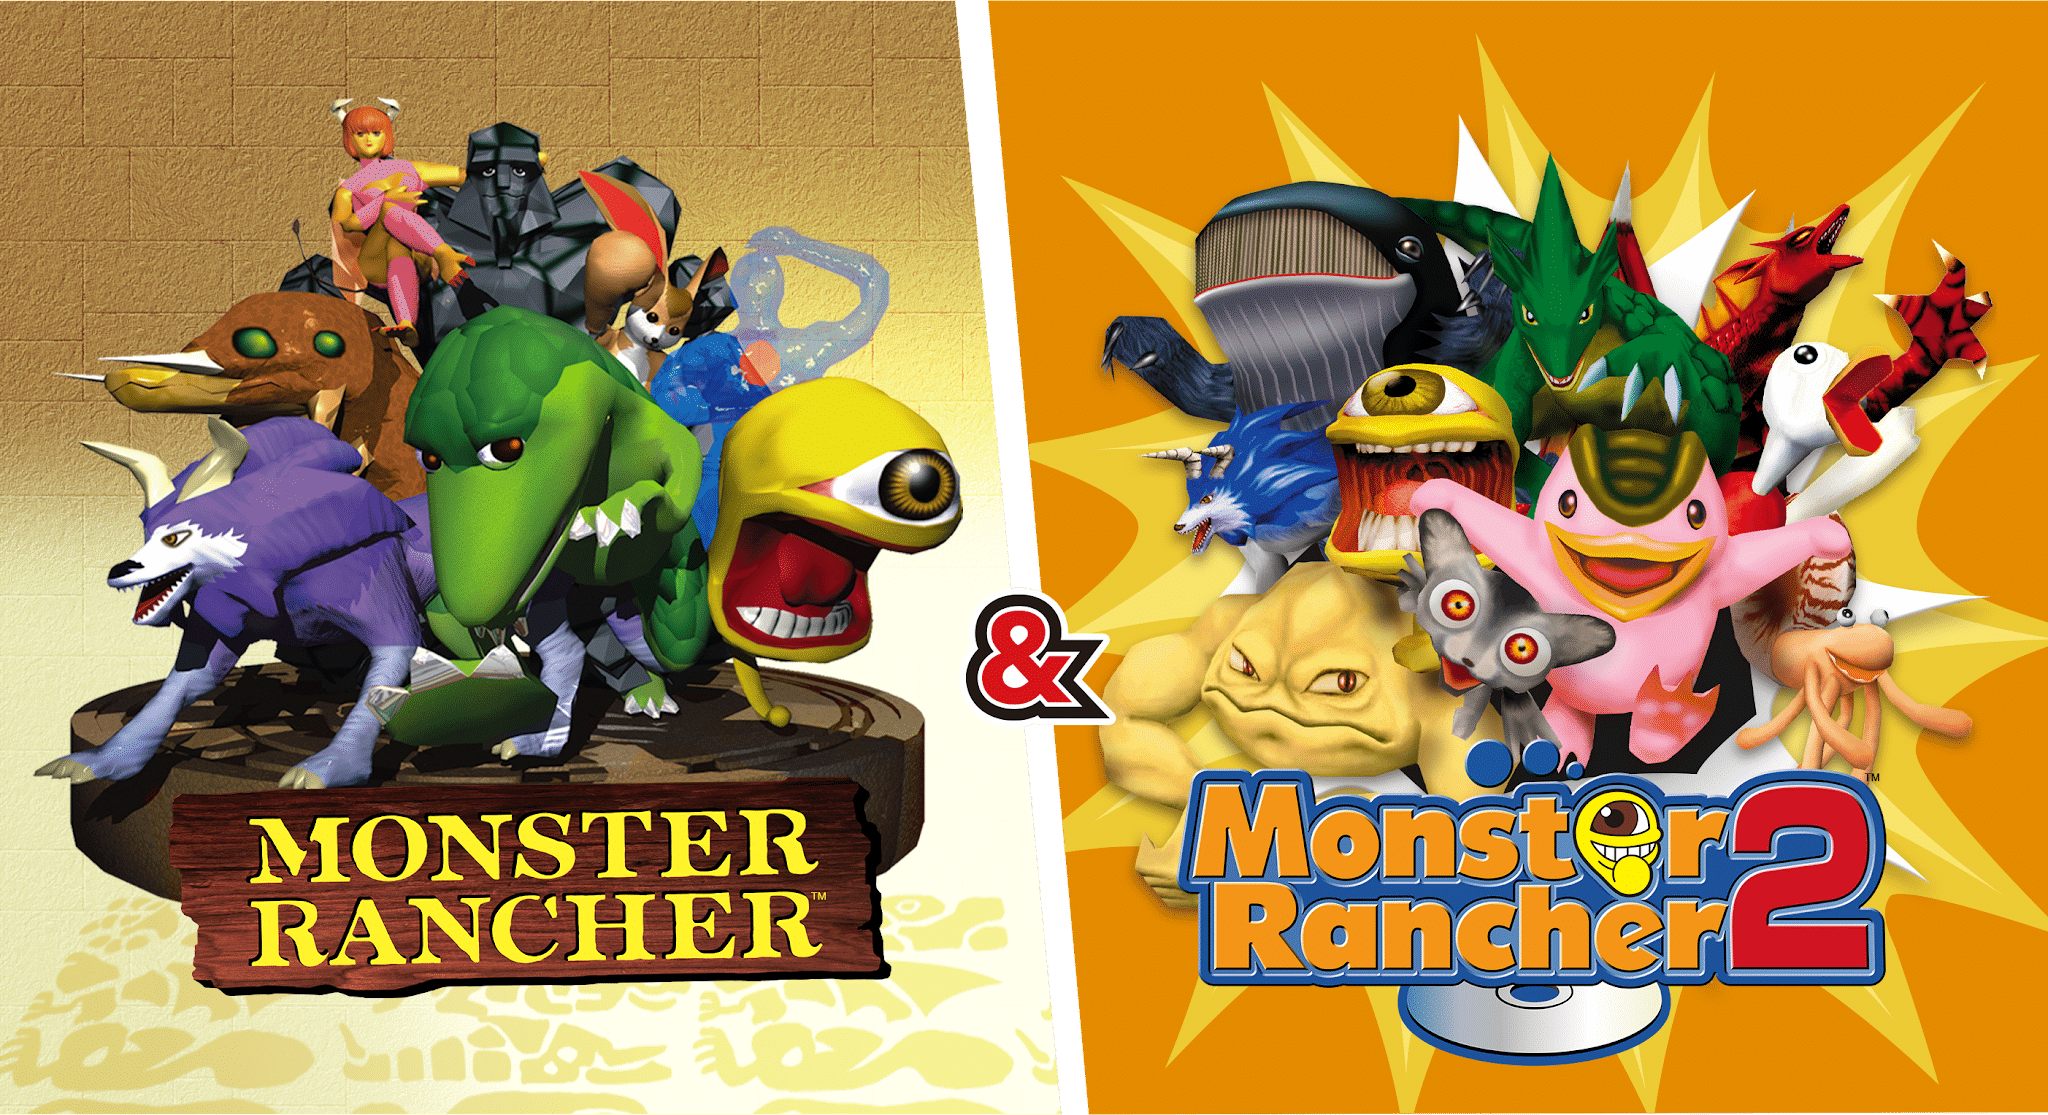 Monster Rancher 1 & 2 DX Coming West for Switch, PC And Mobile In December